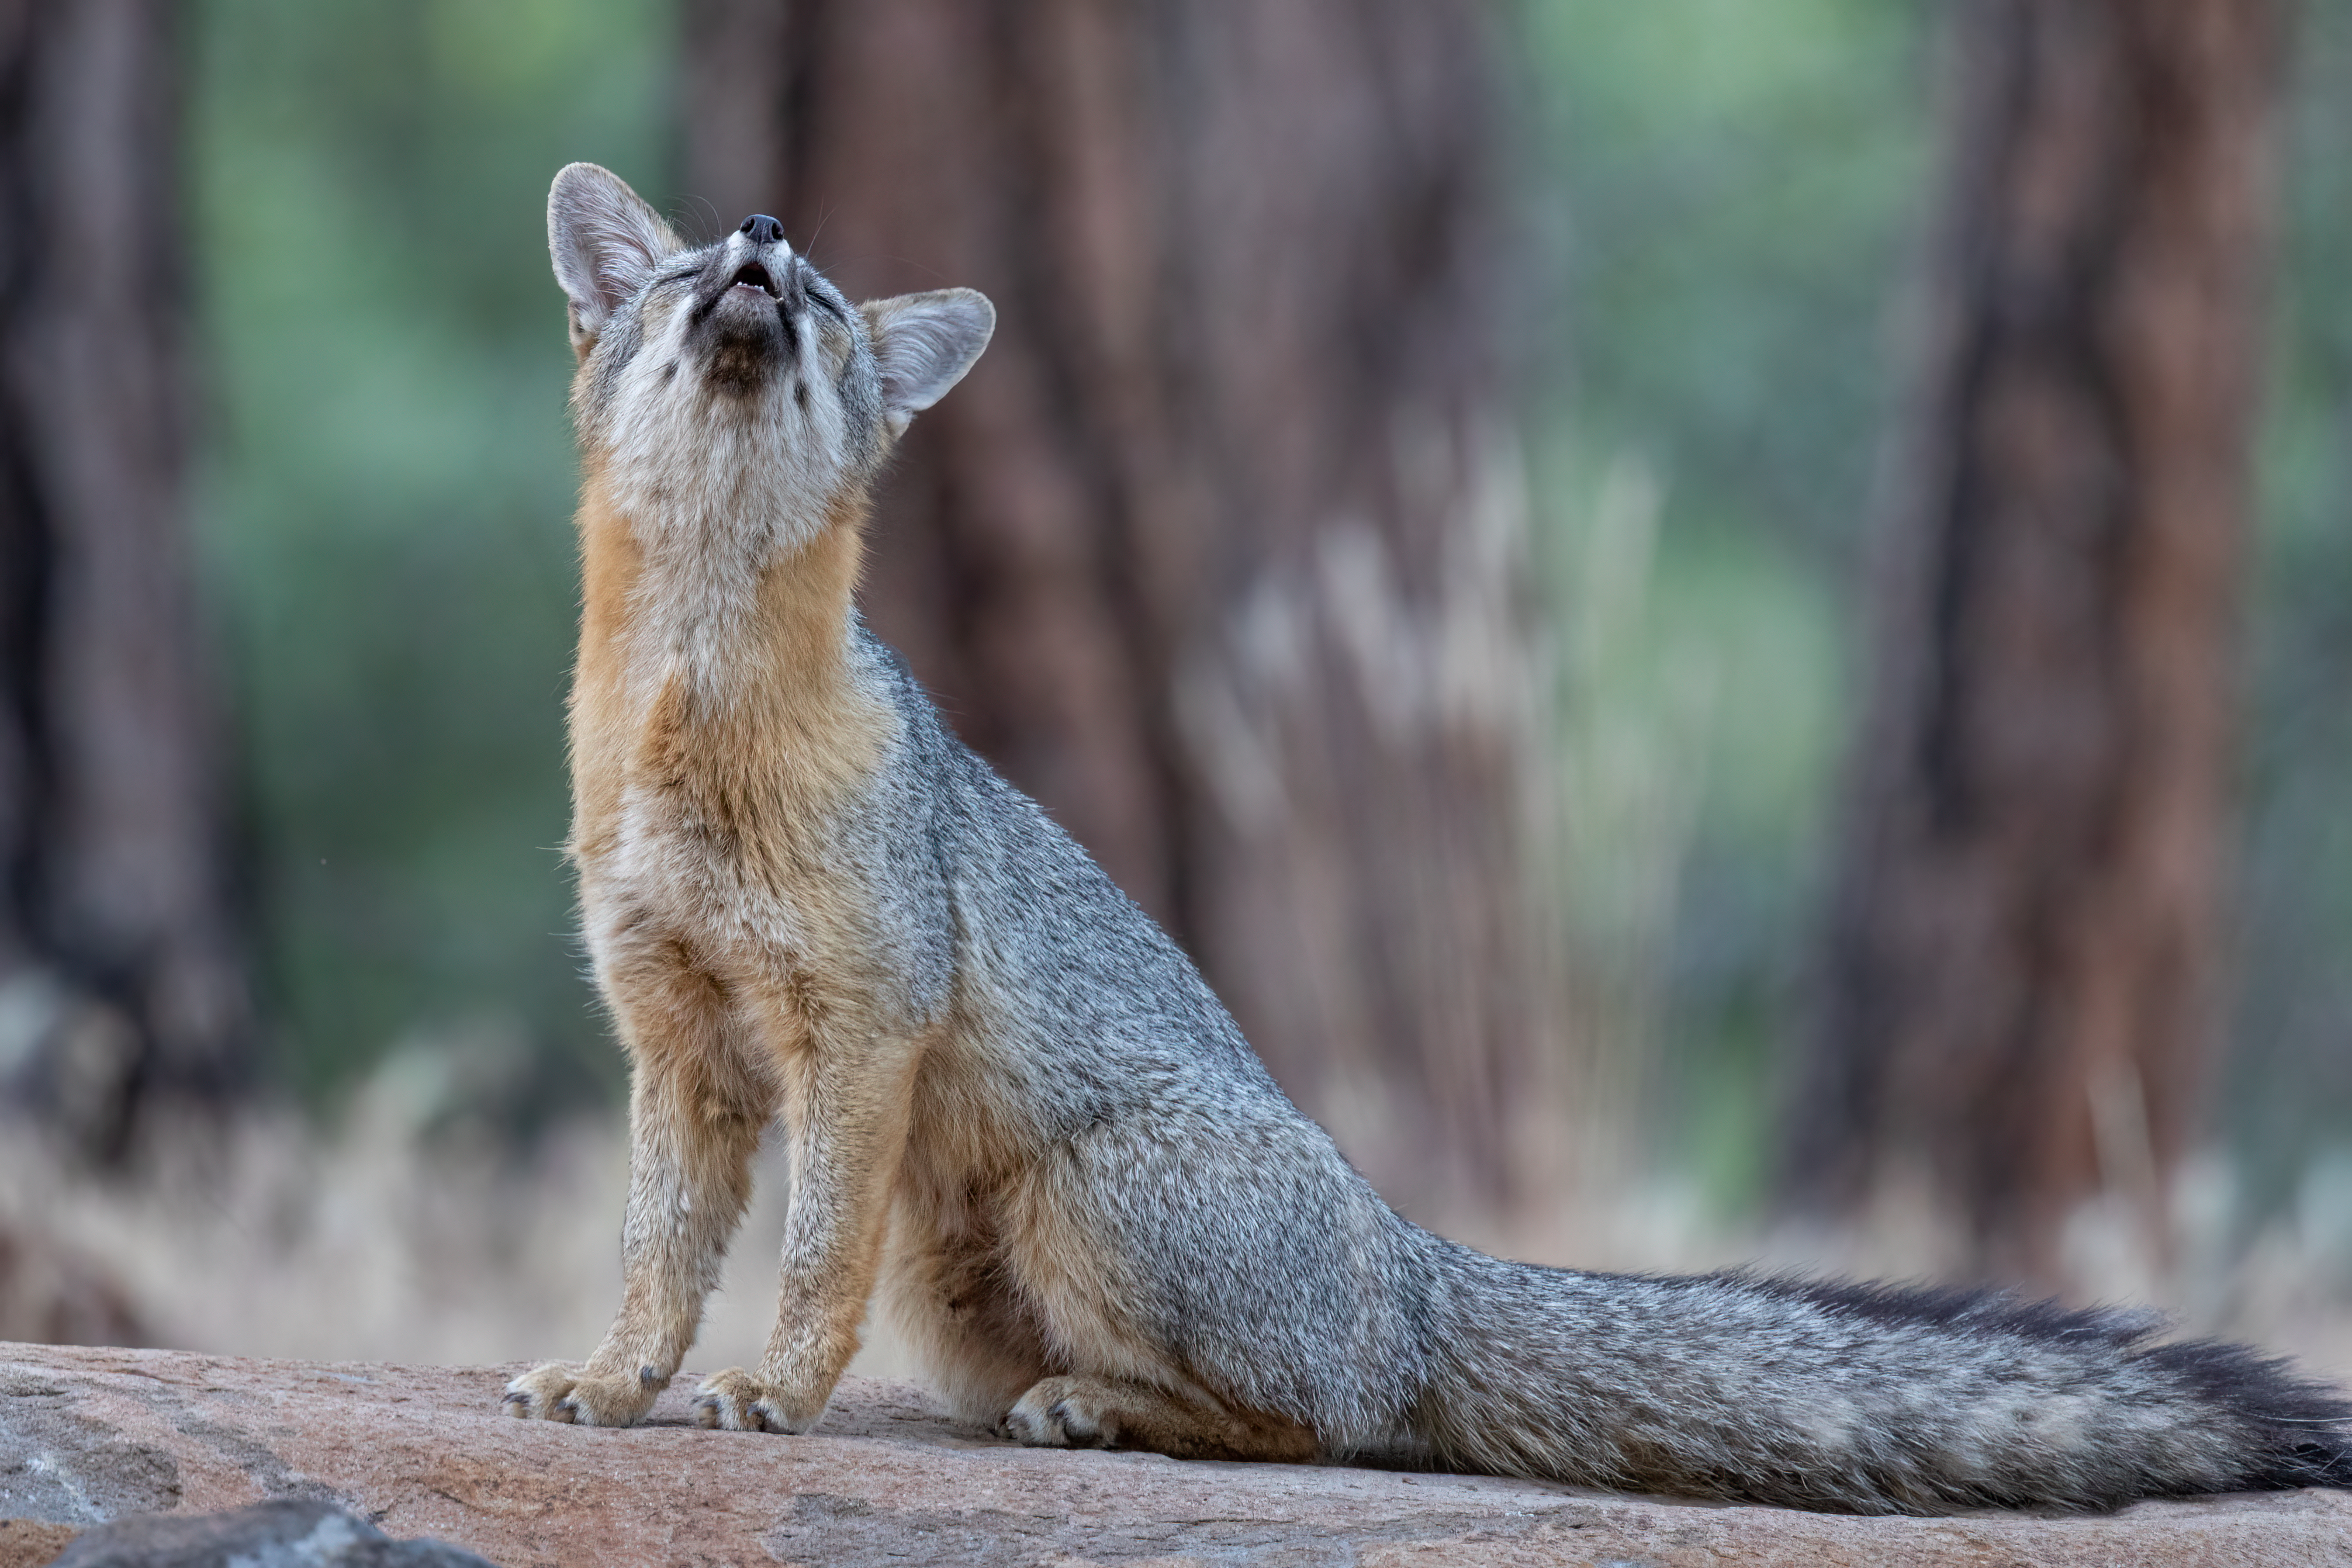 A barking gray fox appears to be singing or howling as it signals to its nearby kits that a photographer is near. 